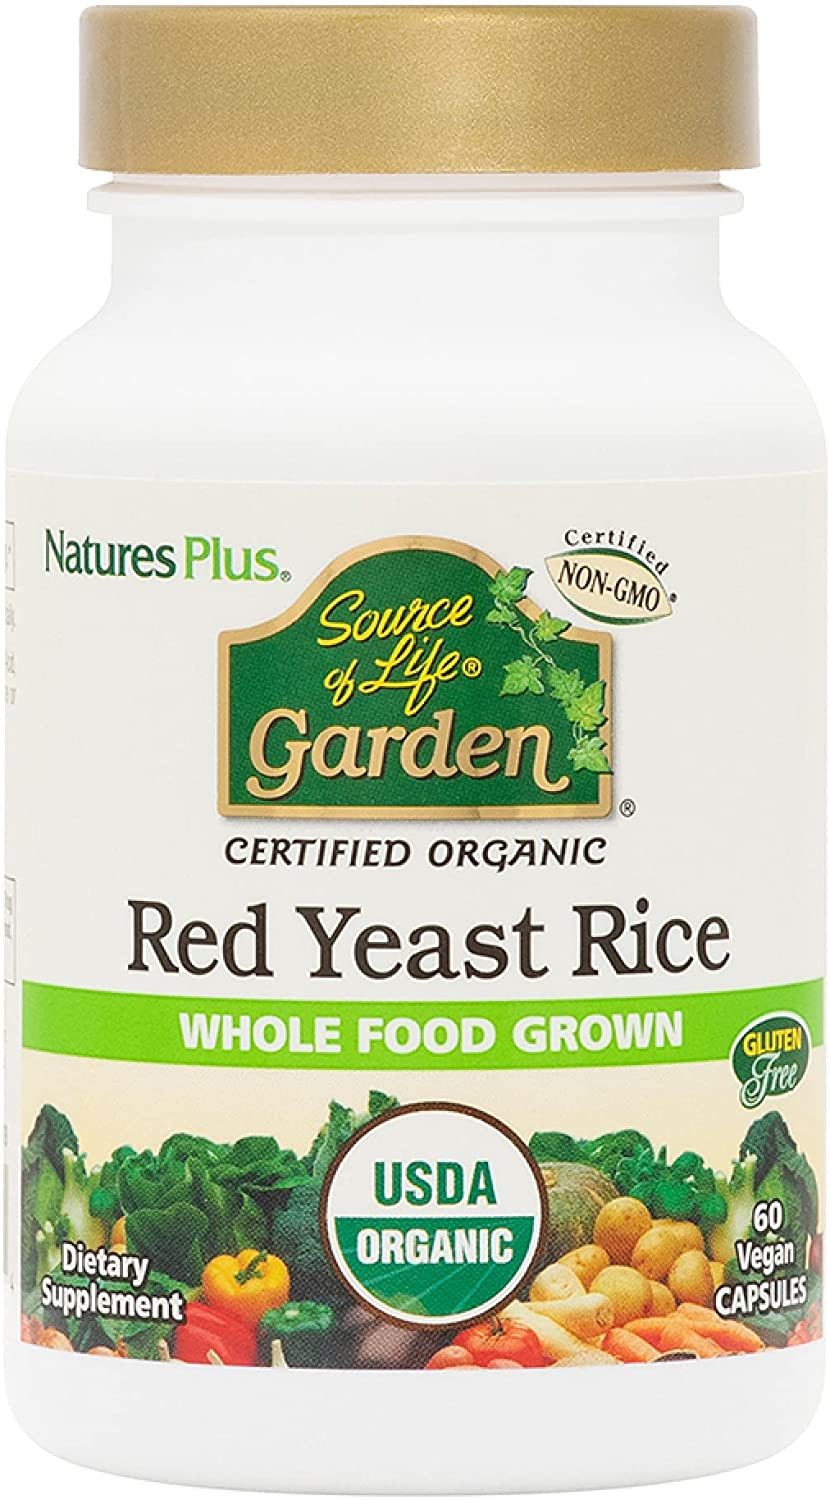 Nature's Plus Source Of Life Garden Red Yeast Rice 60 Capsules